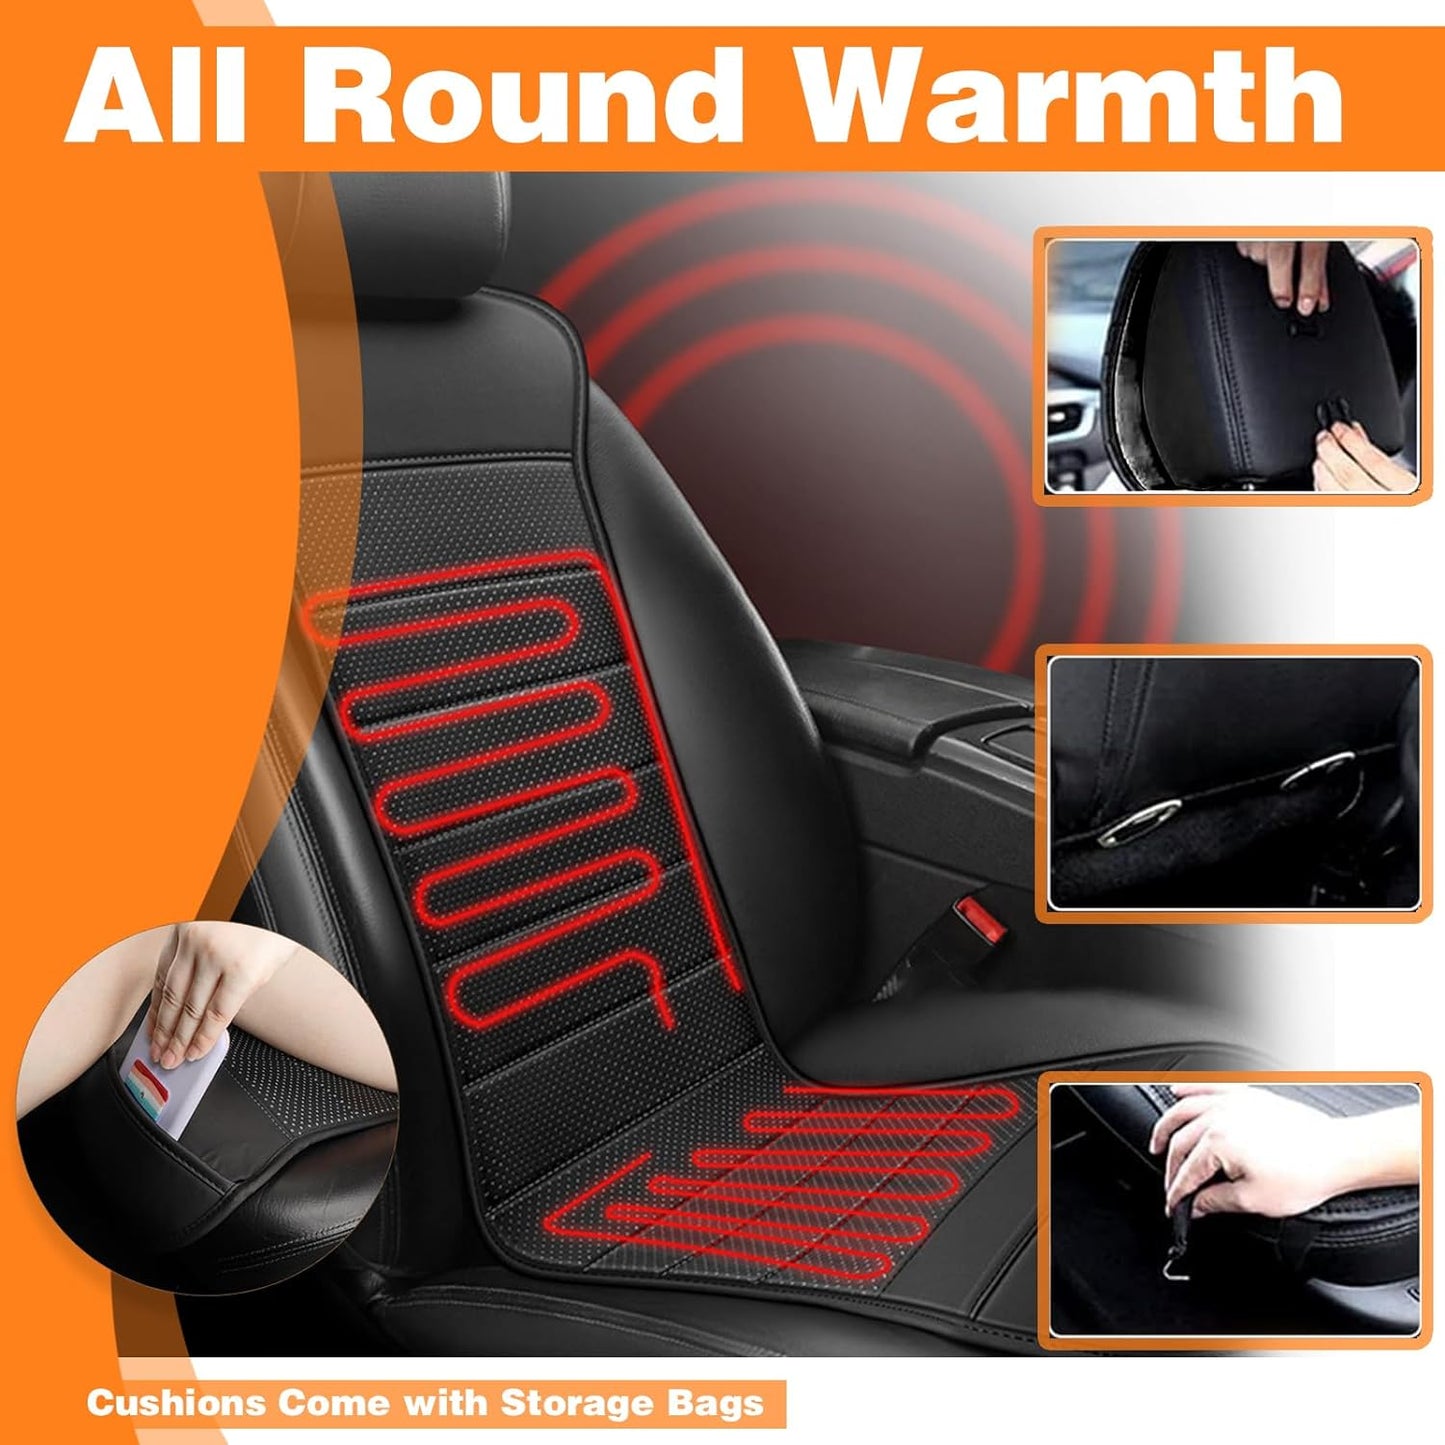 Car Heated Seat Cushion Leather Warm Comfortable Cover